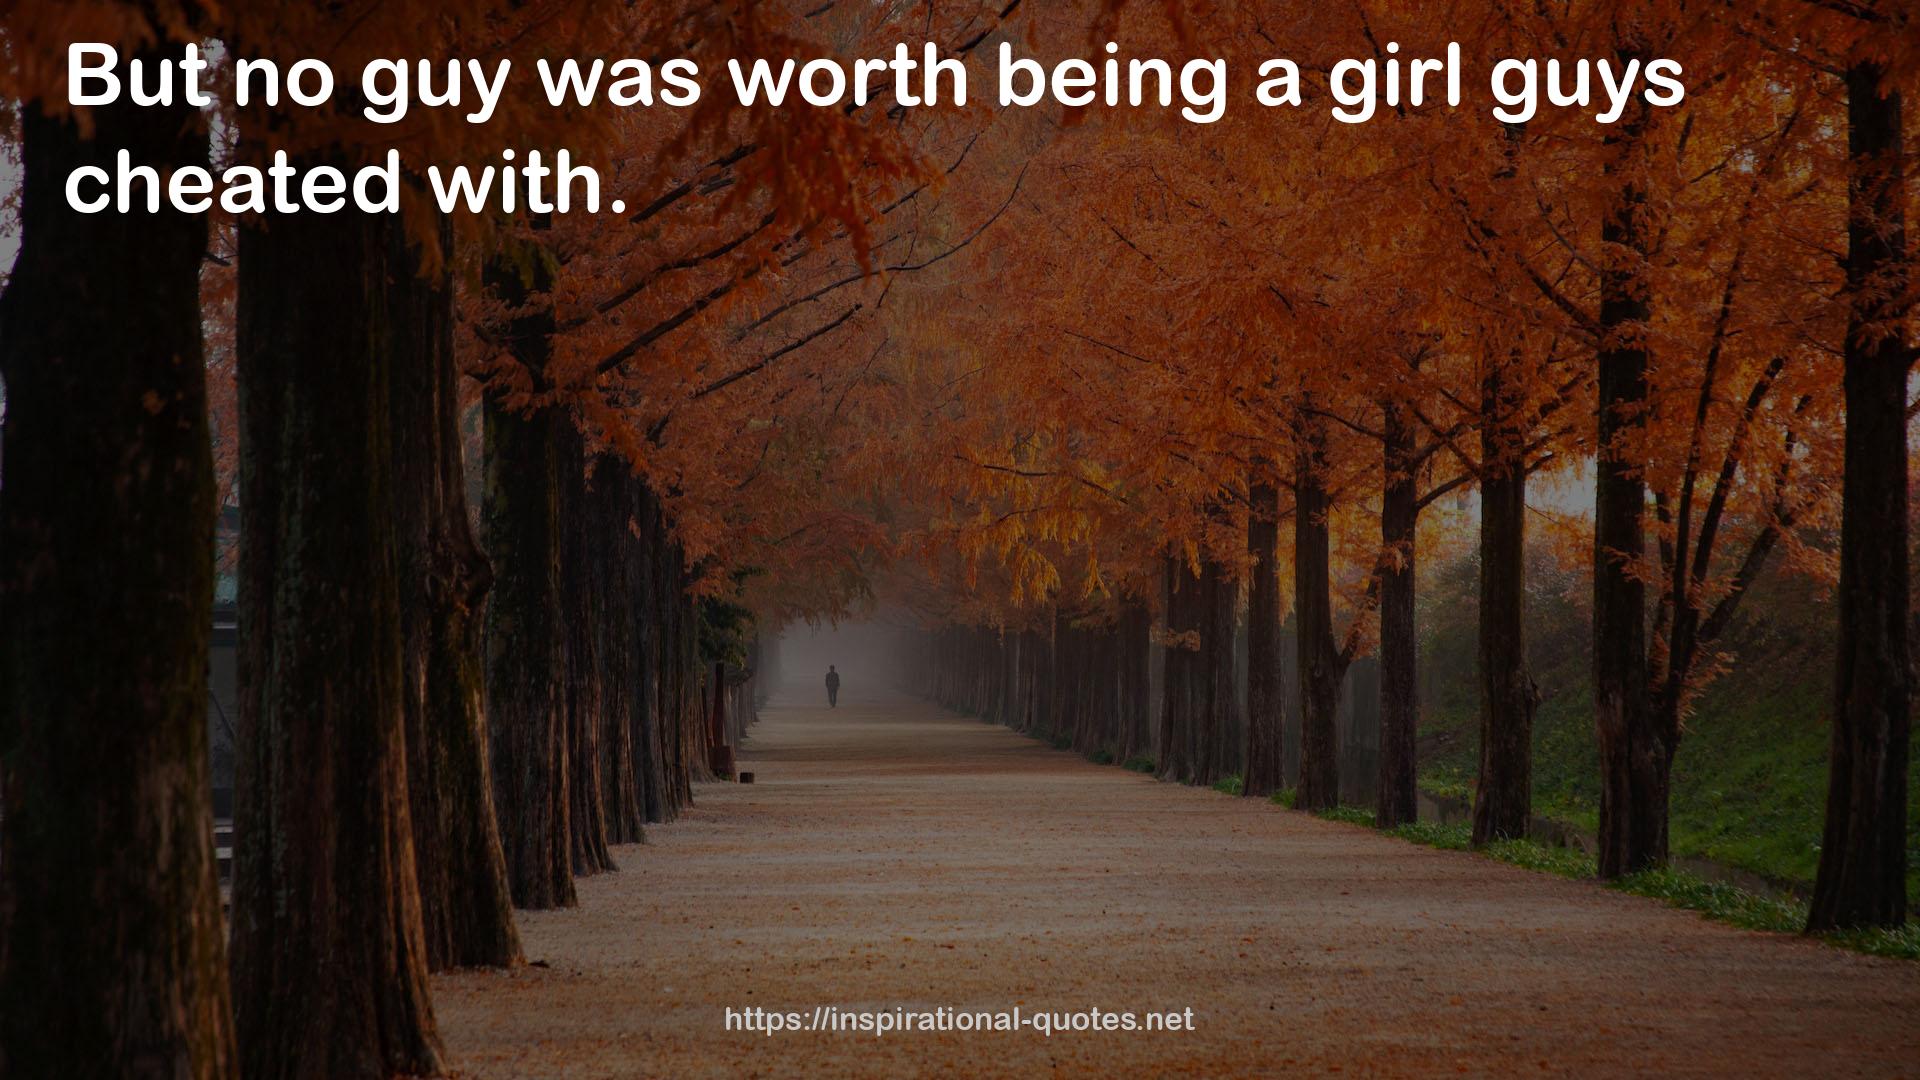 a girl guys  QUOTES